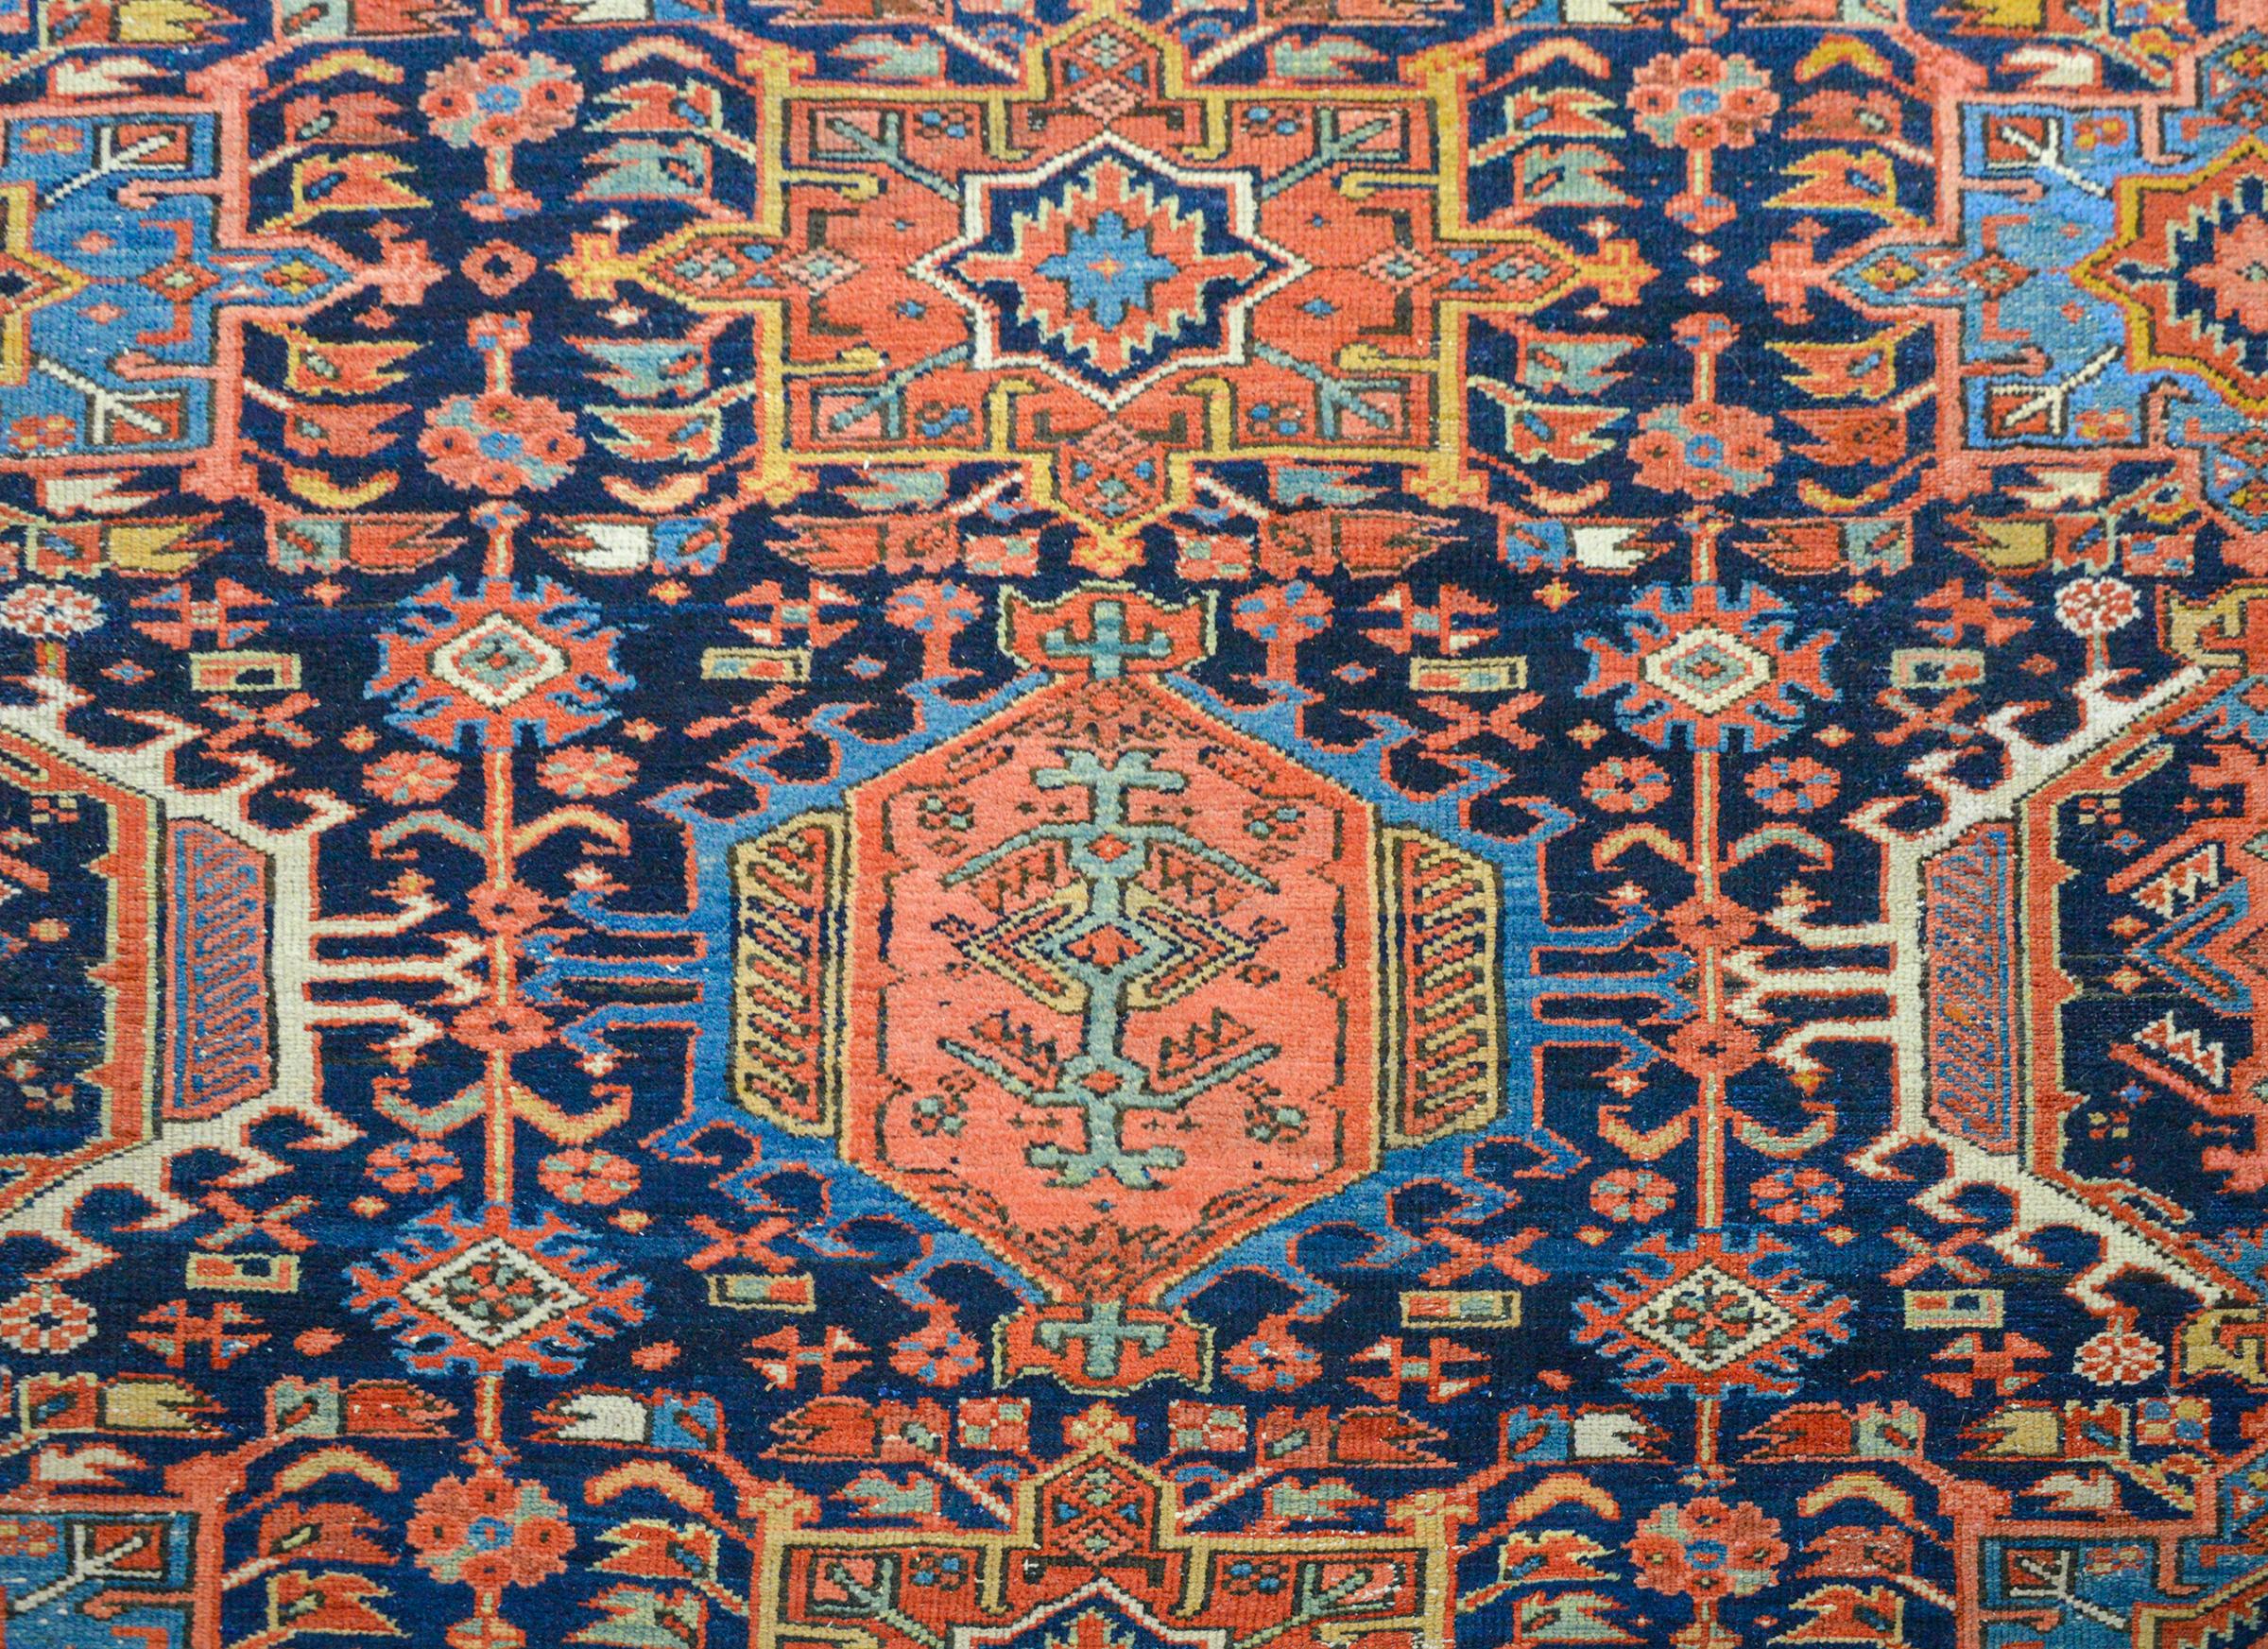 An incredible early 20th century Persian Karaje Serapi rug with a field of all-over large-scale stylized flowers amidst a field of more flowers and vines on a dark indigo background. The border is exceptional, with a repeated large-scale floral